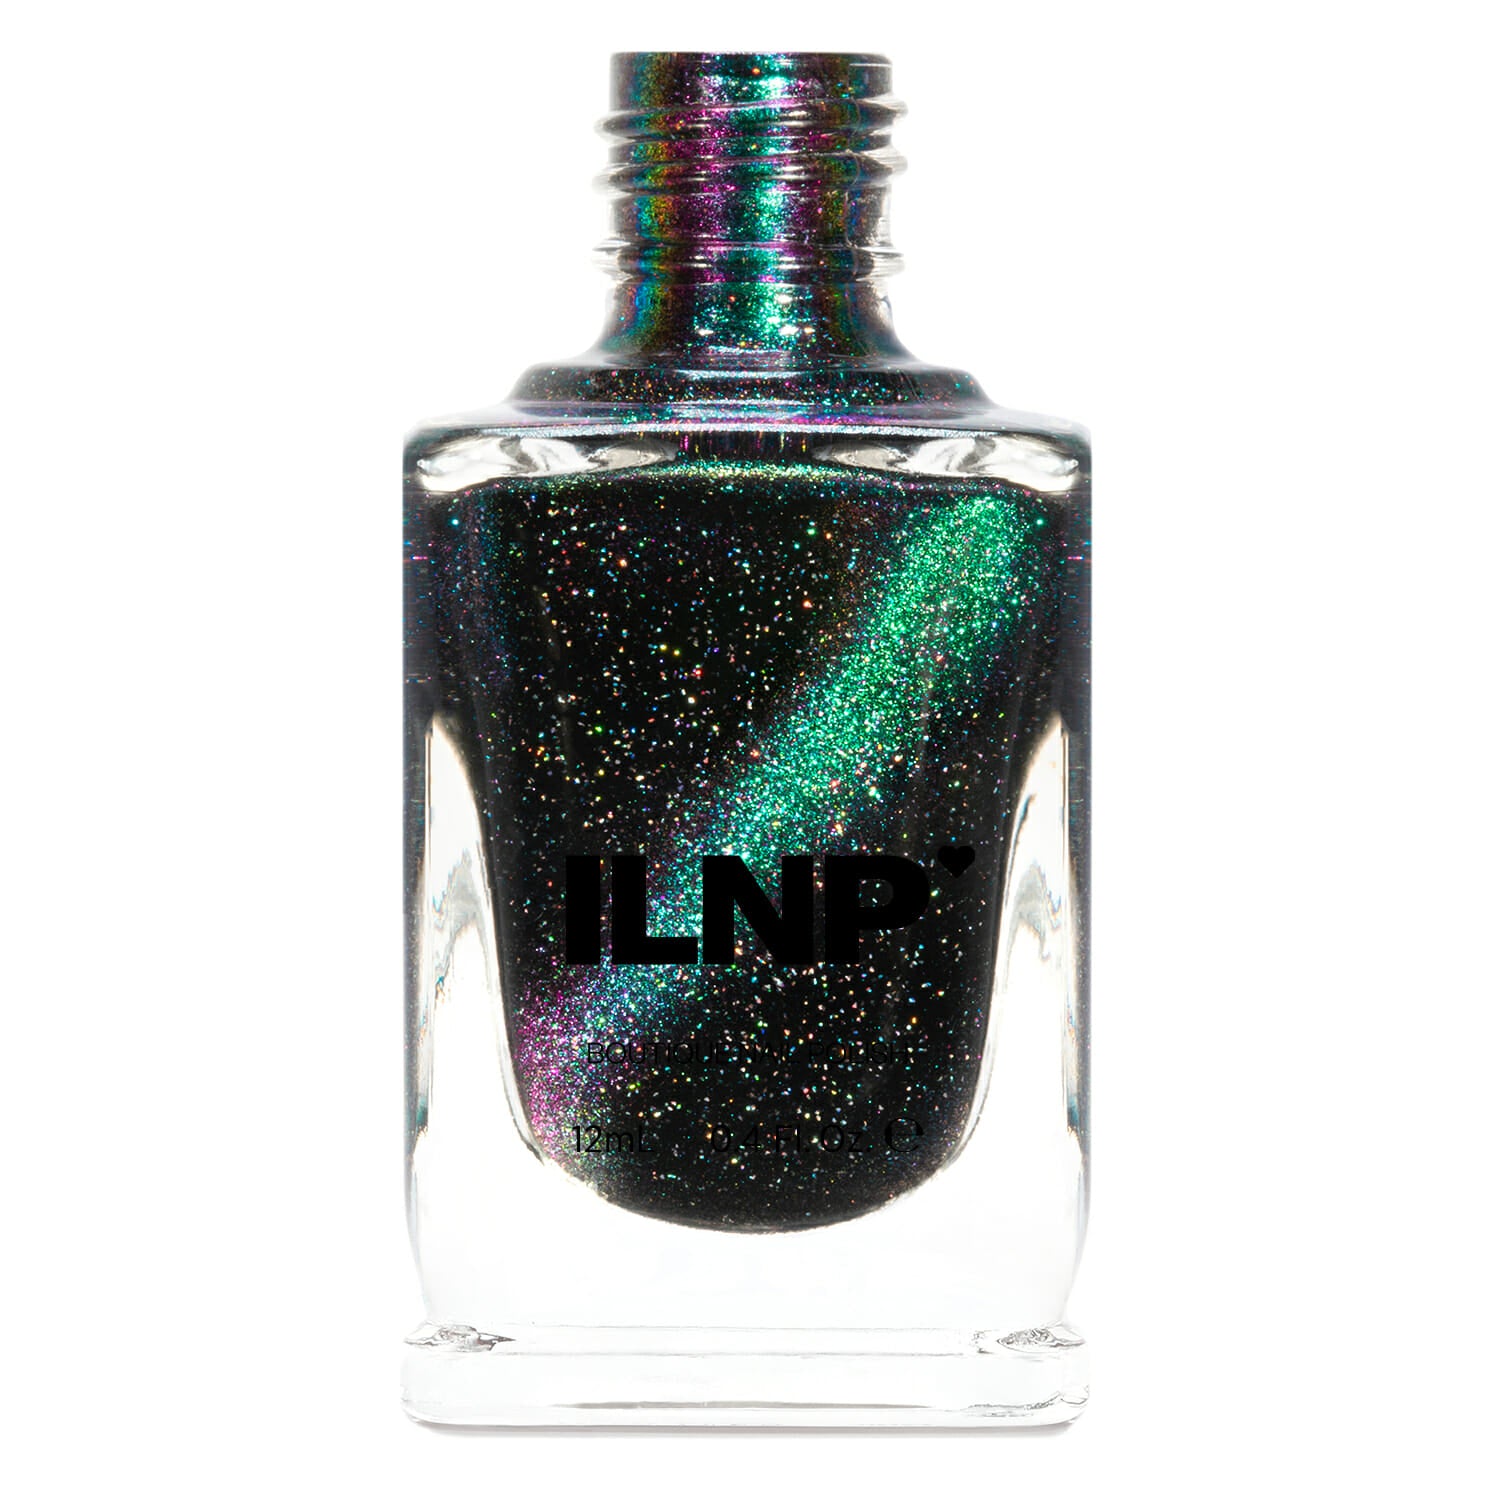 ILNP - Deep Space (Magnetic)